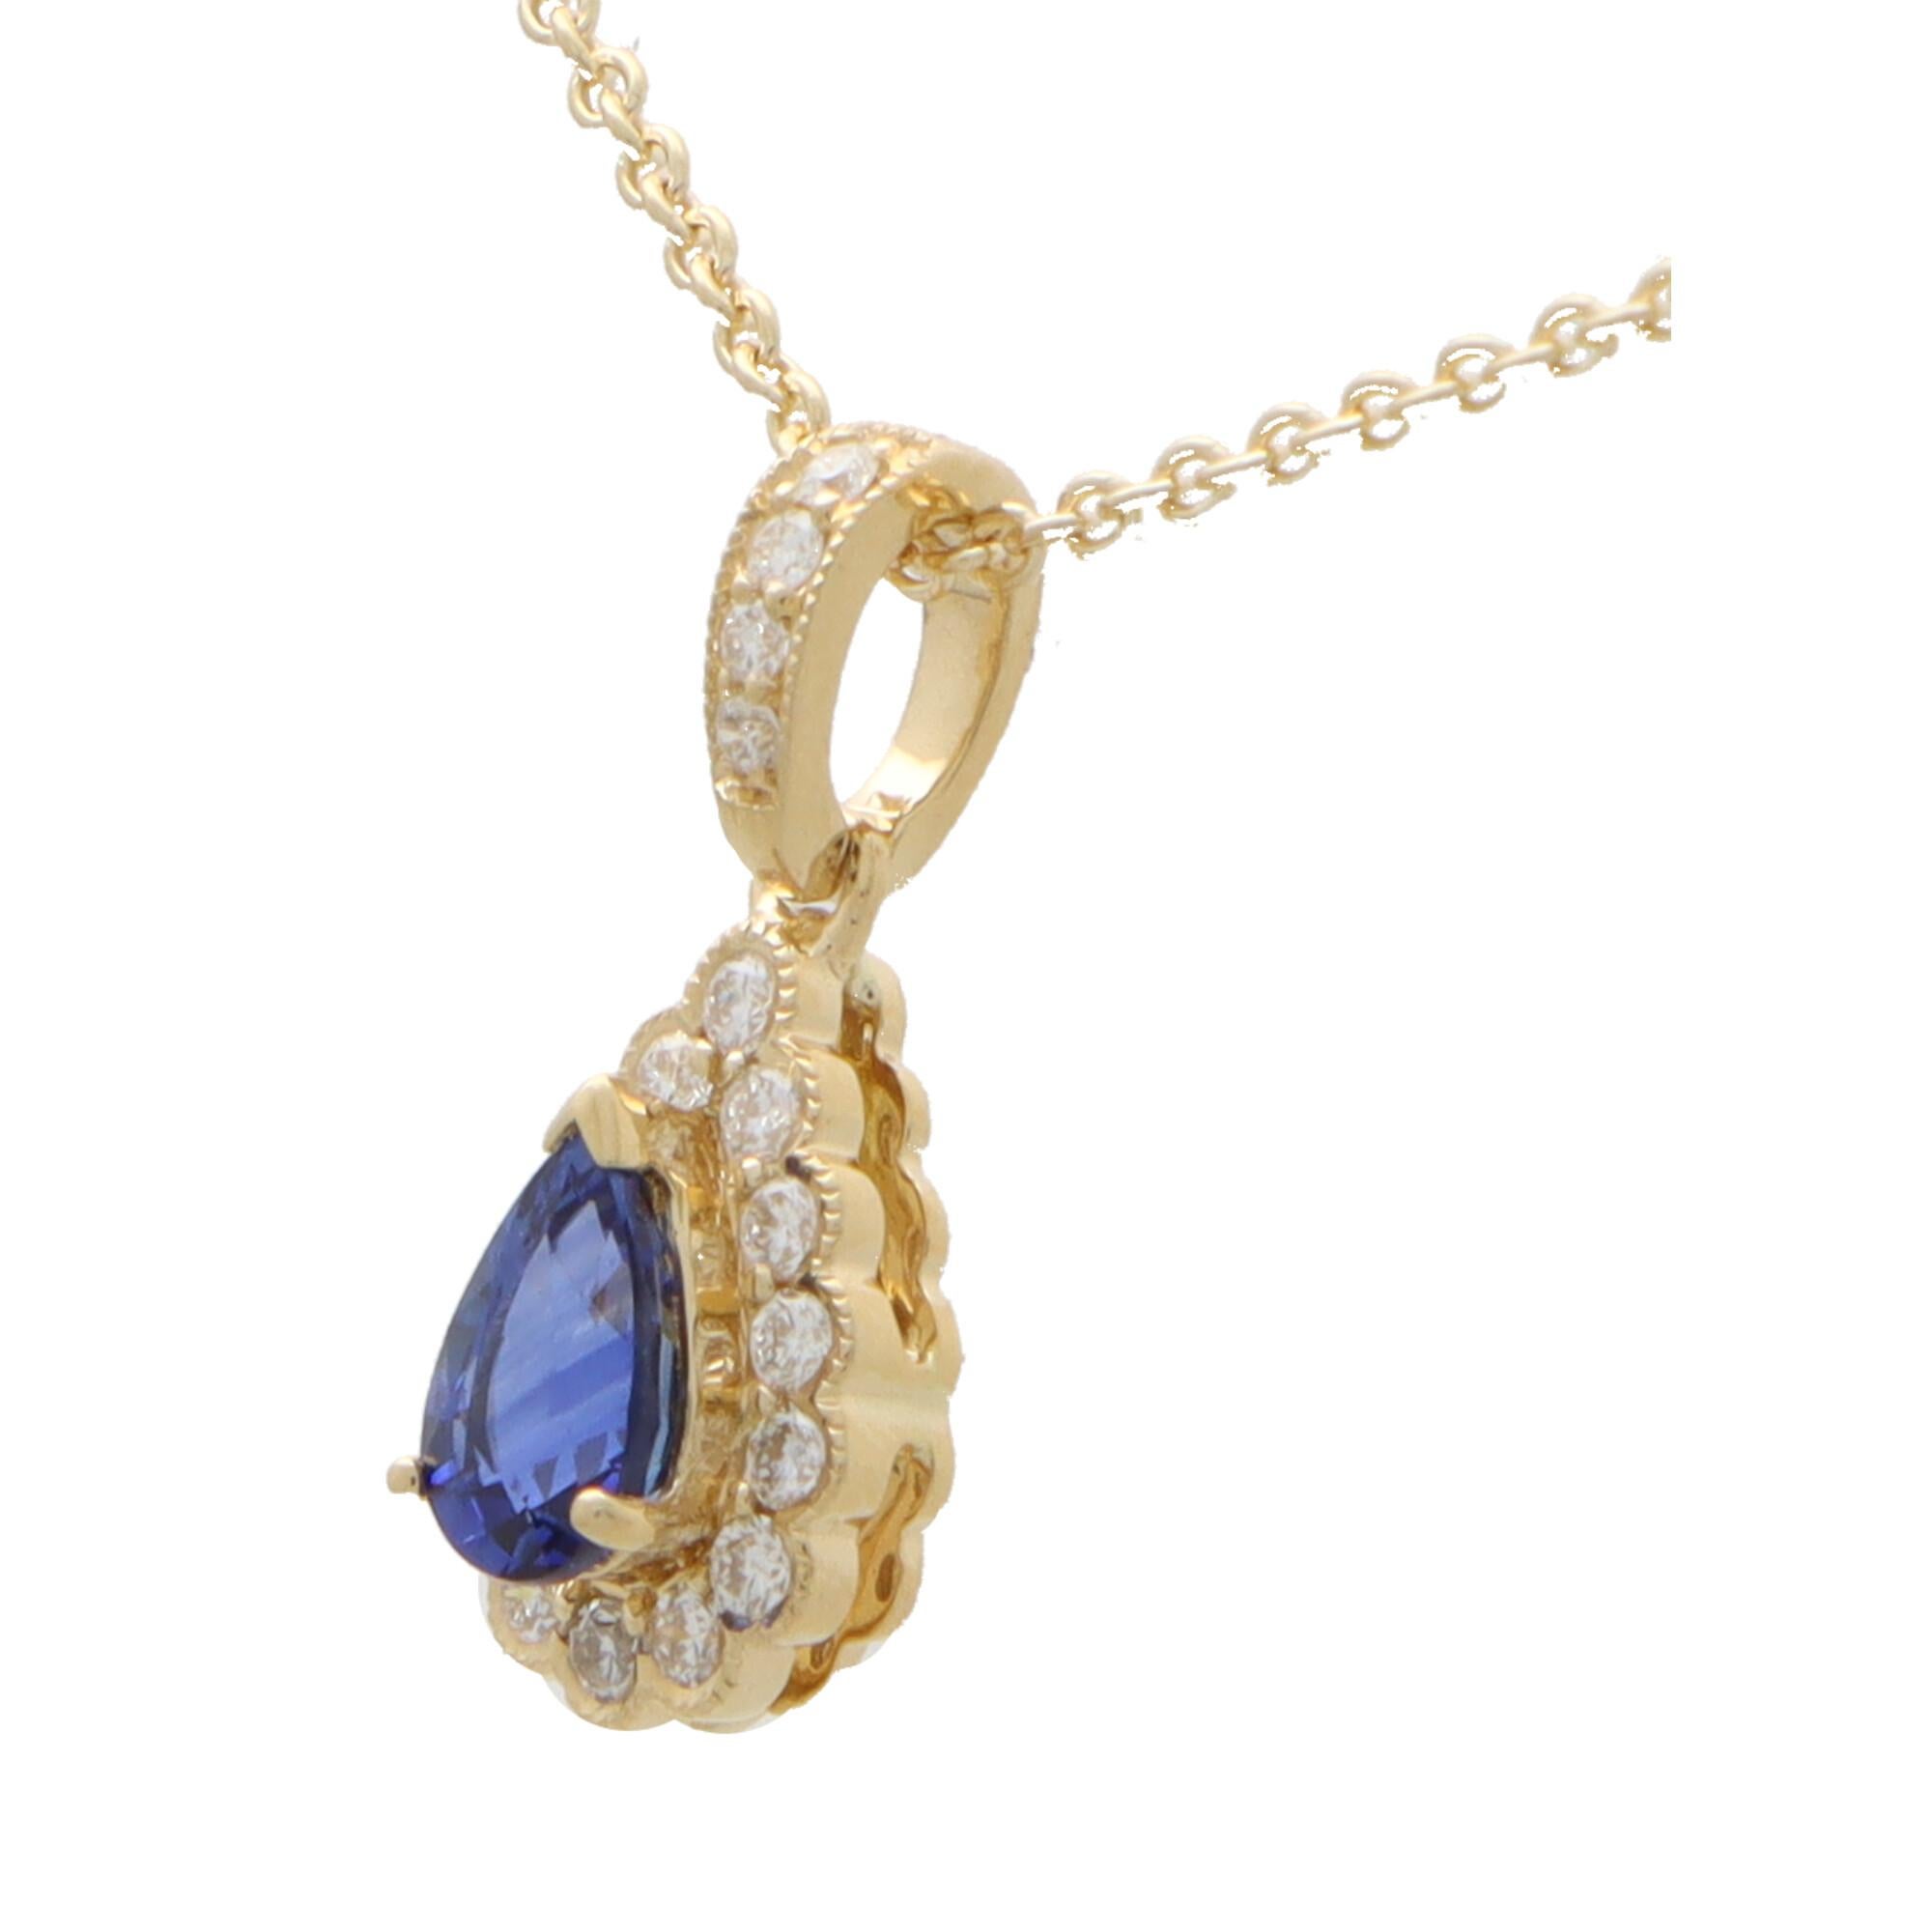 Pear Cut Sapphire and Diamond Pear Shaped Pendant Necklace in 18k Yellow Gold